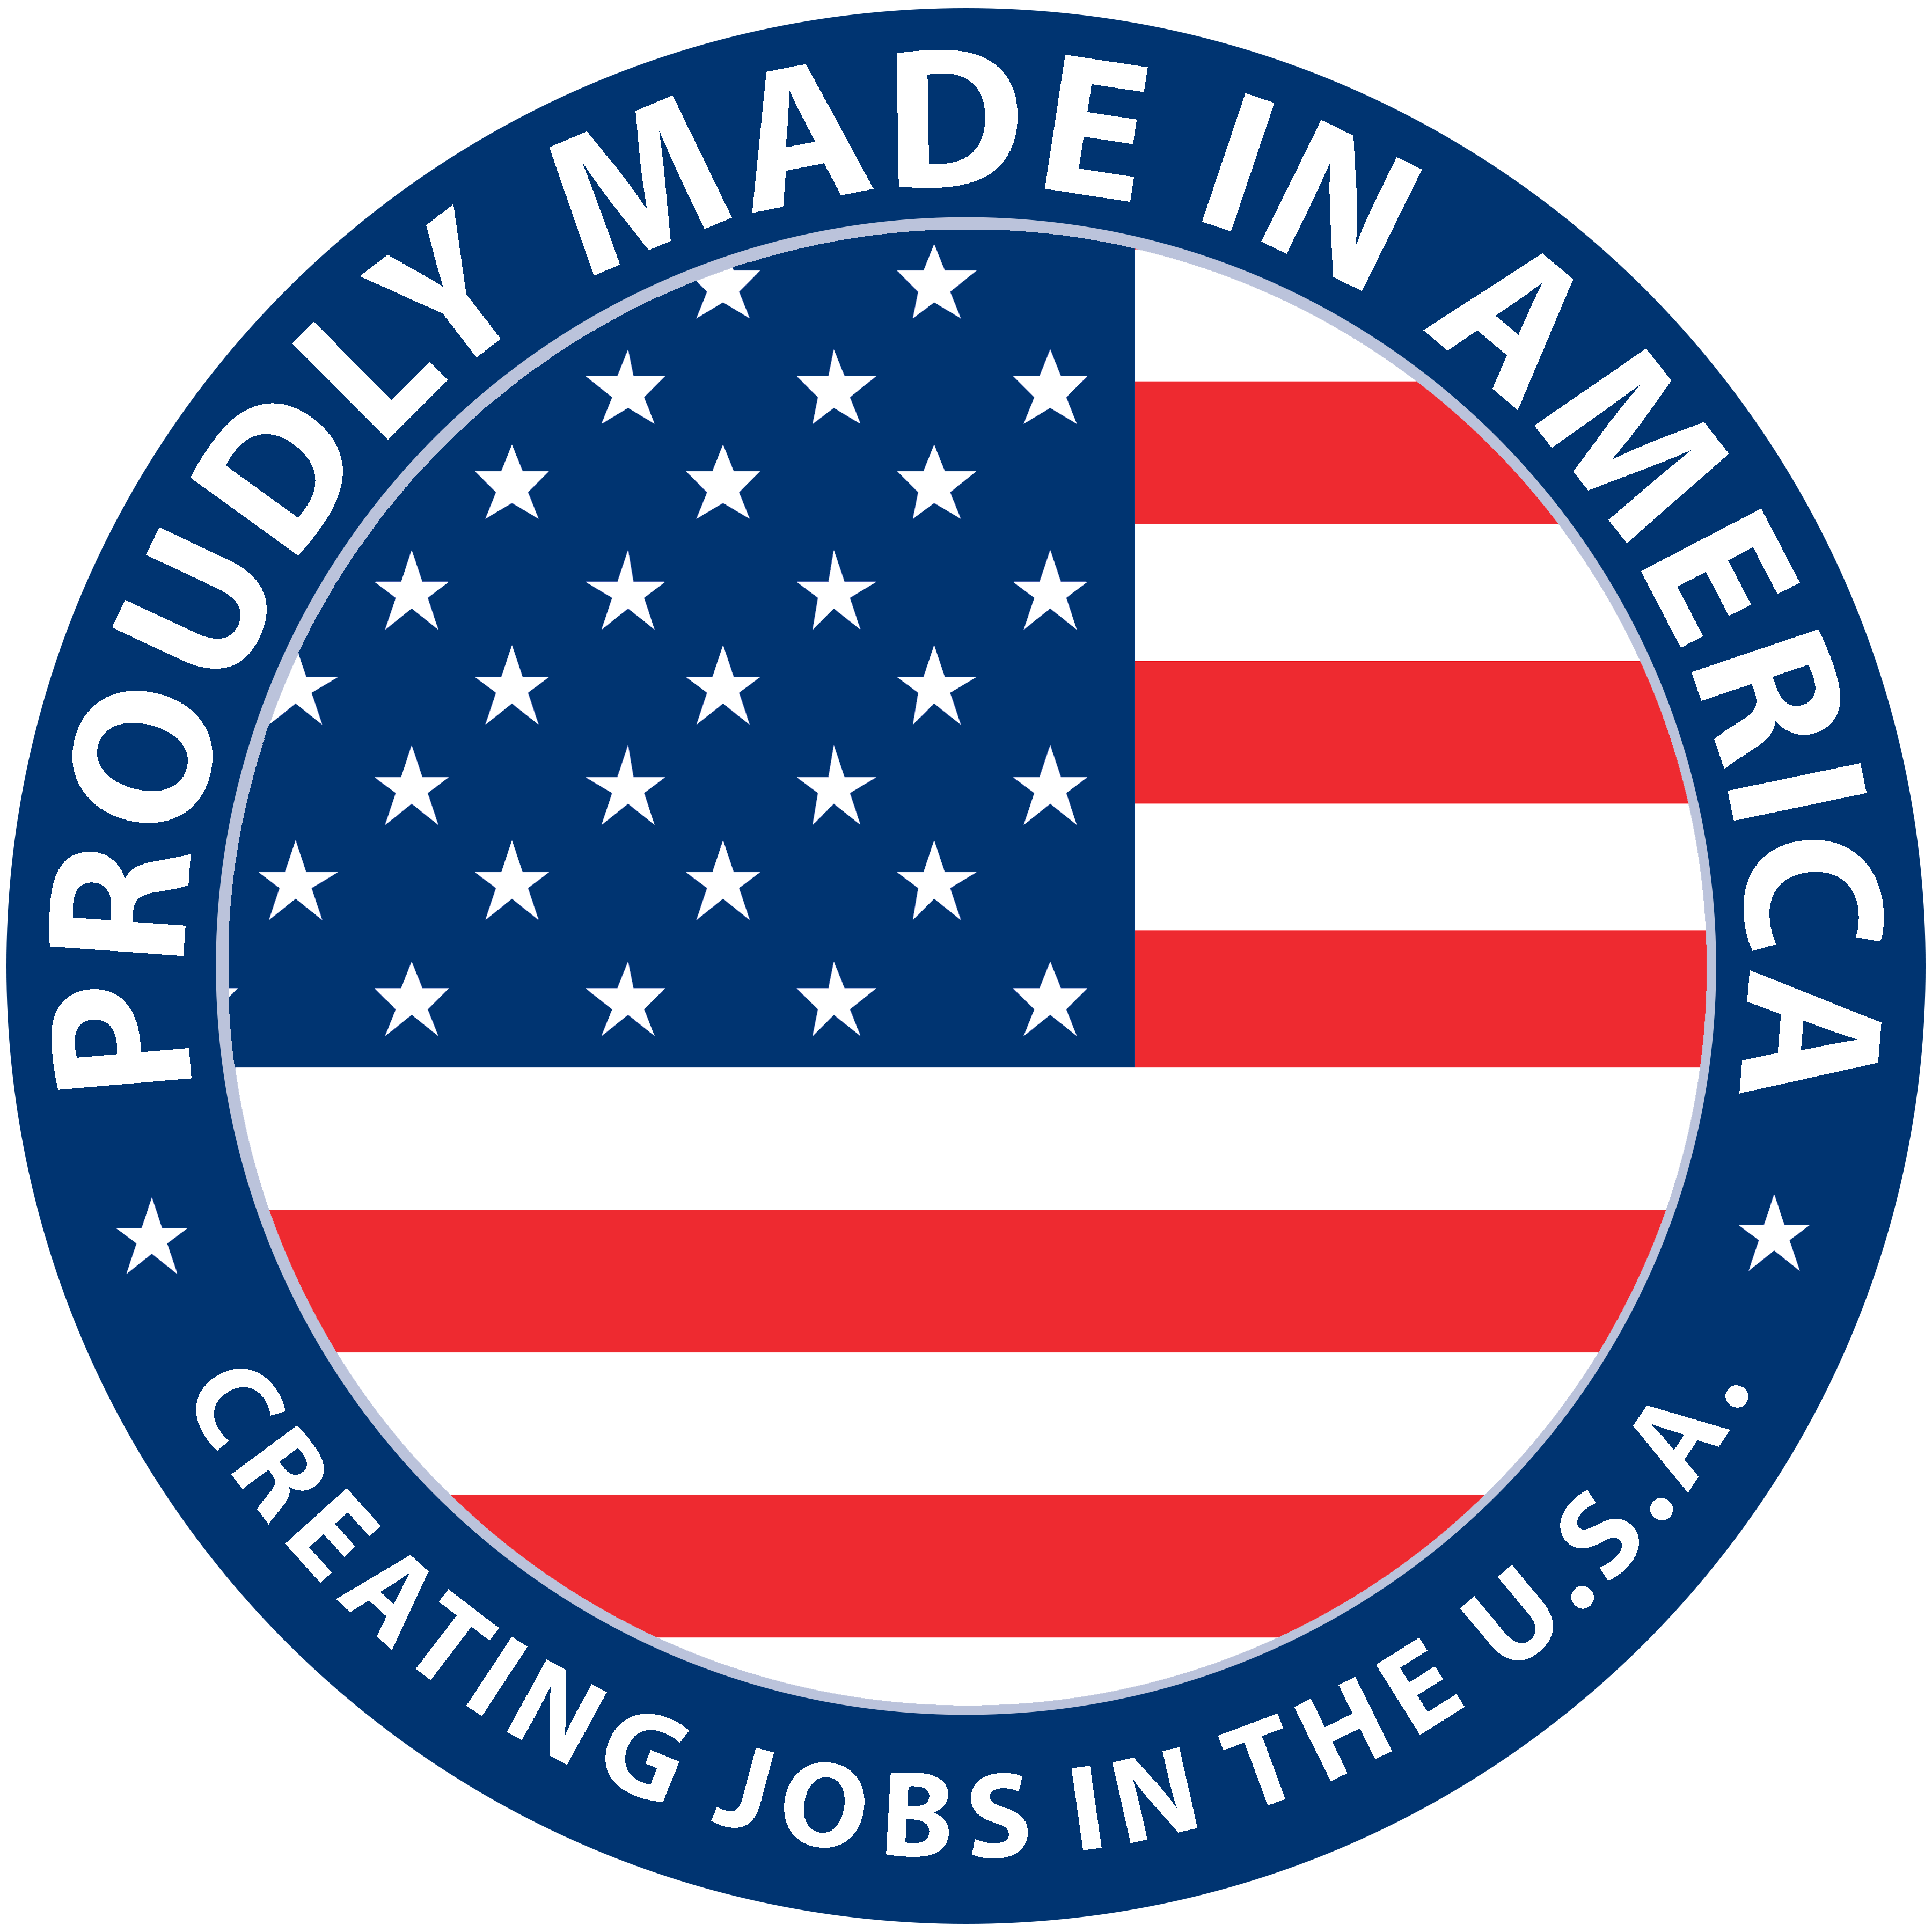 Proudly made in America. Creating jobs in the USA.